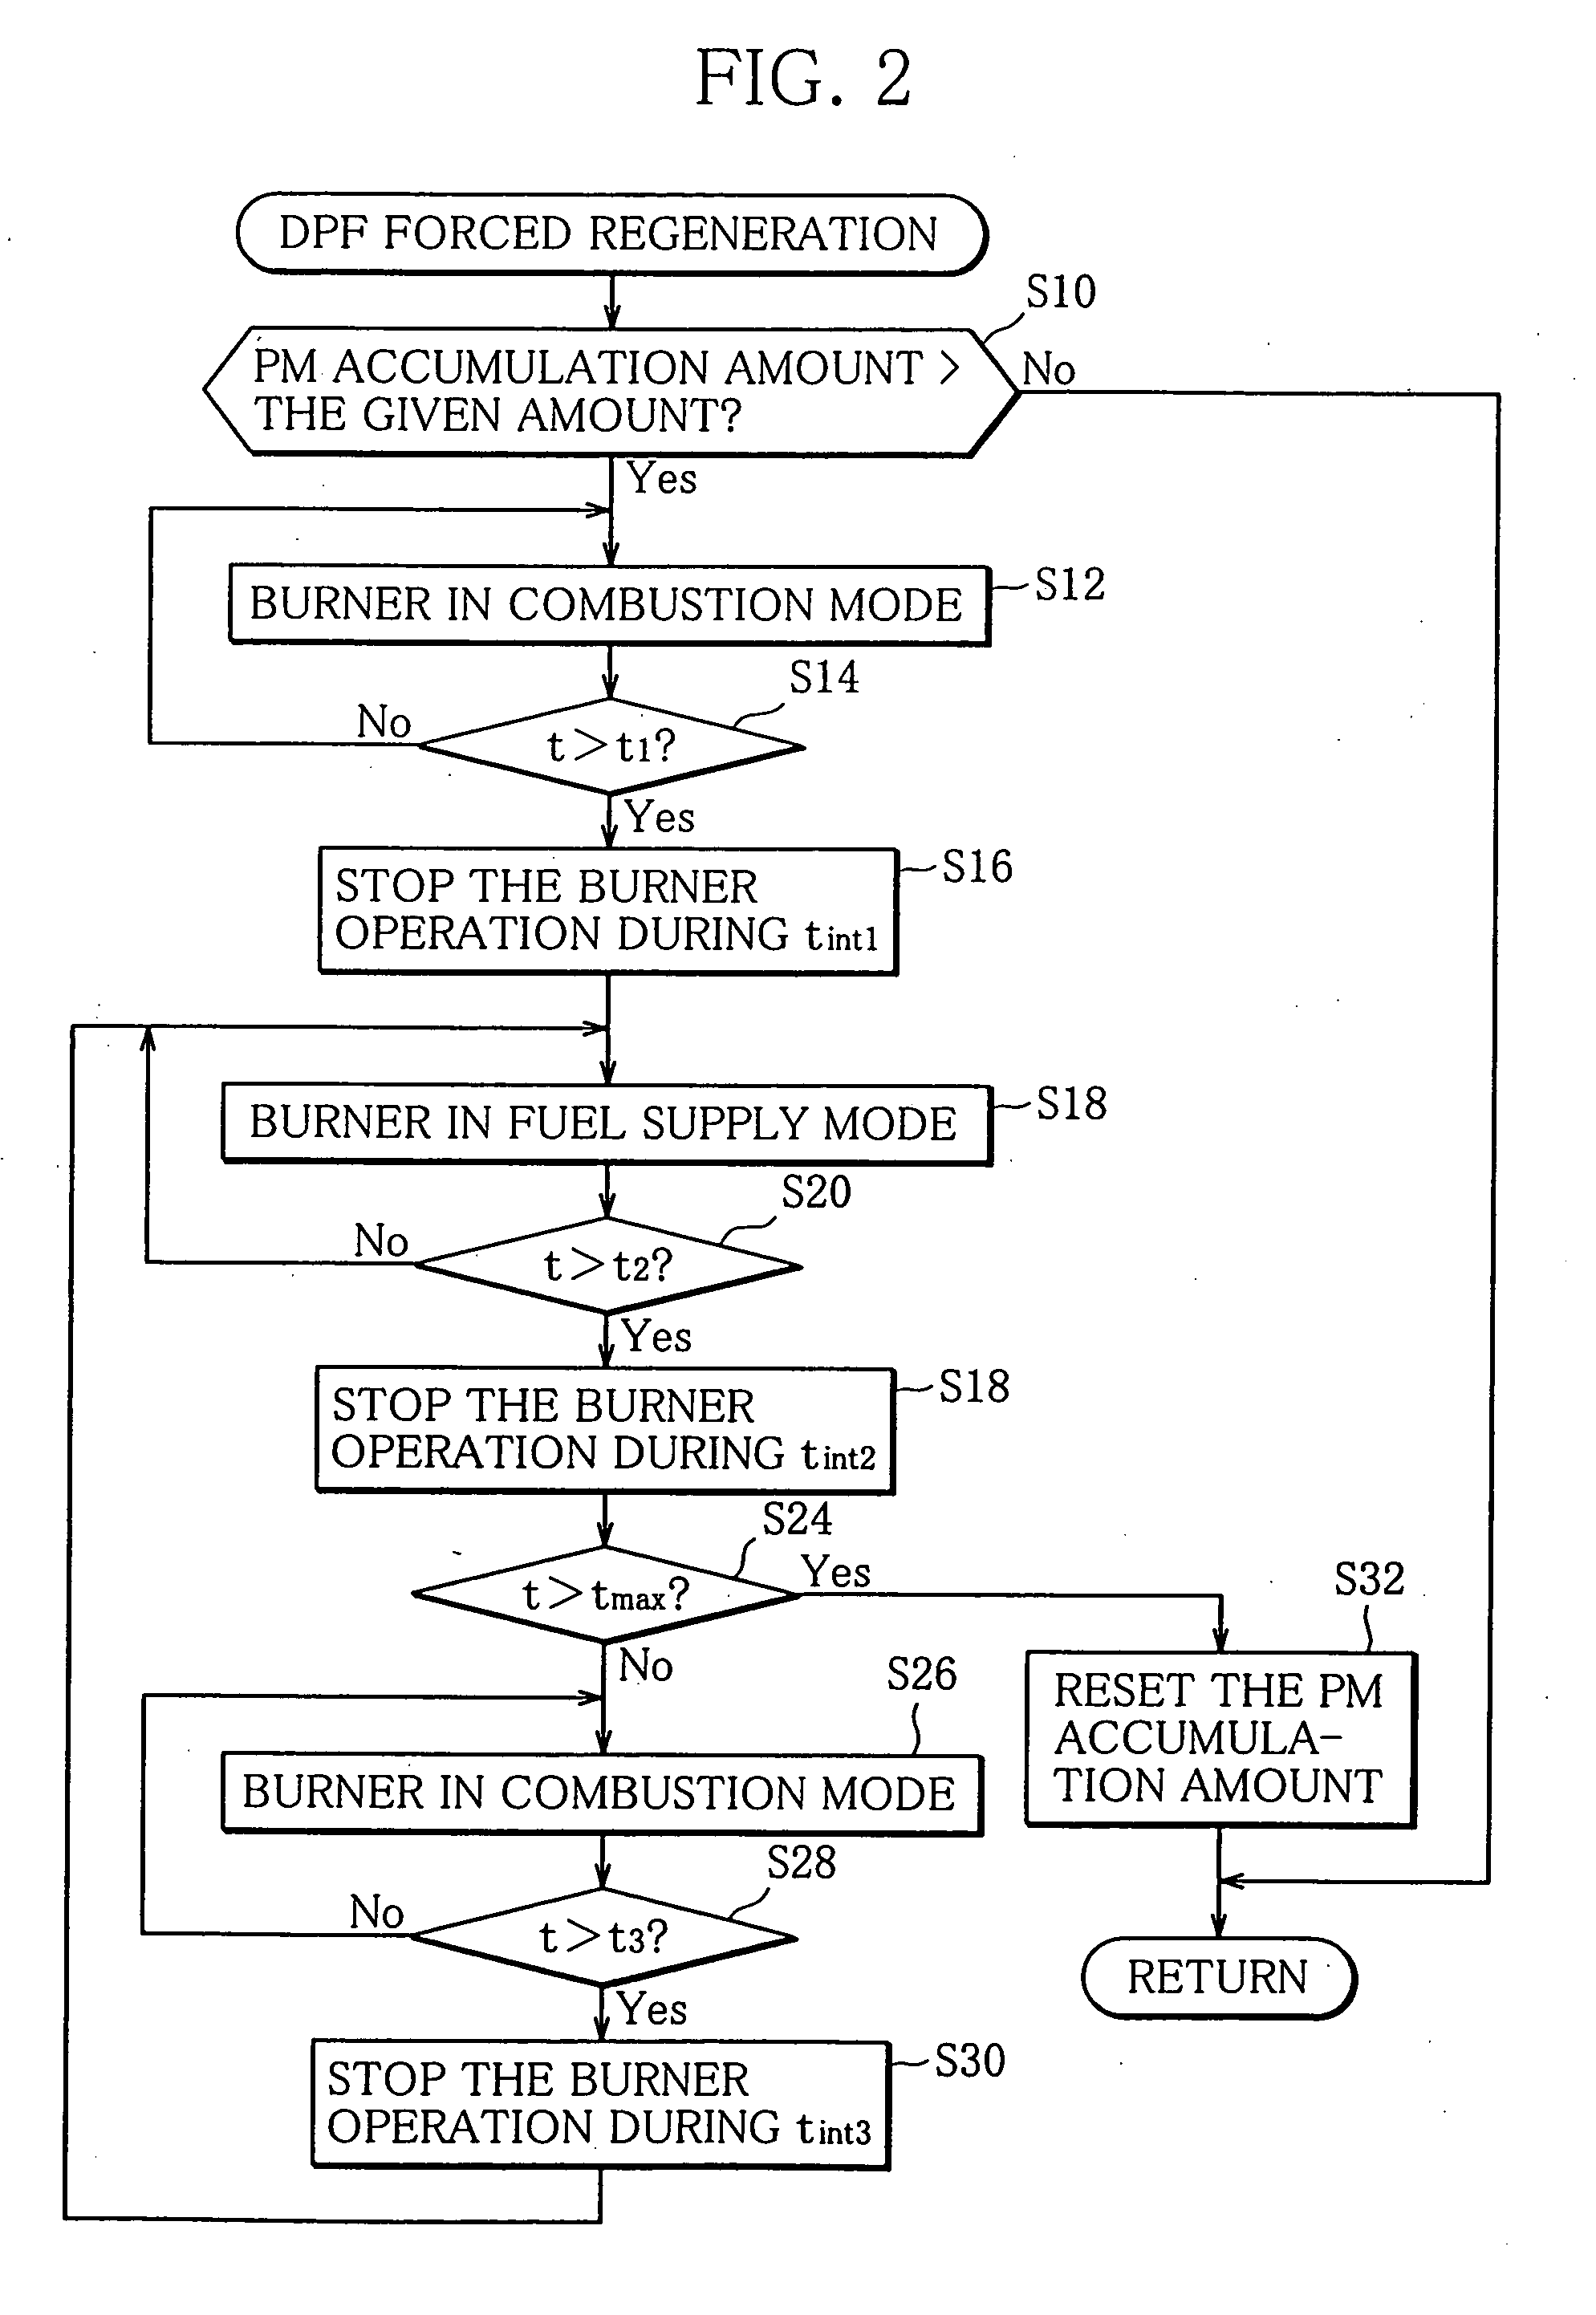 Exhaust emission control device for an internal combustion engine